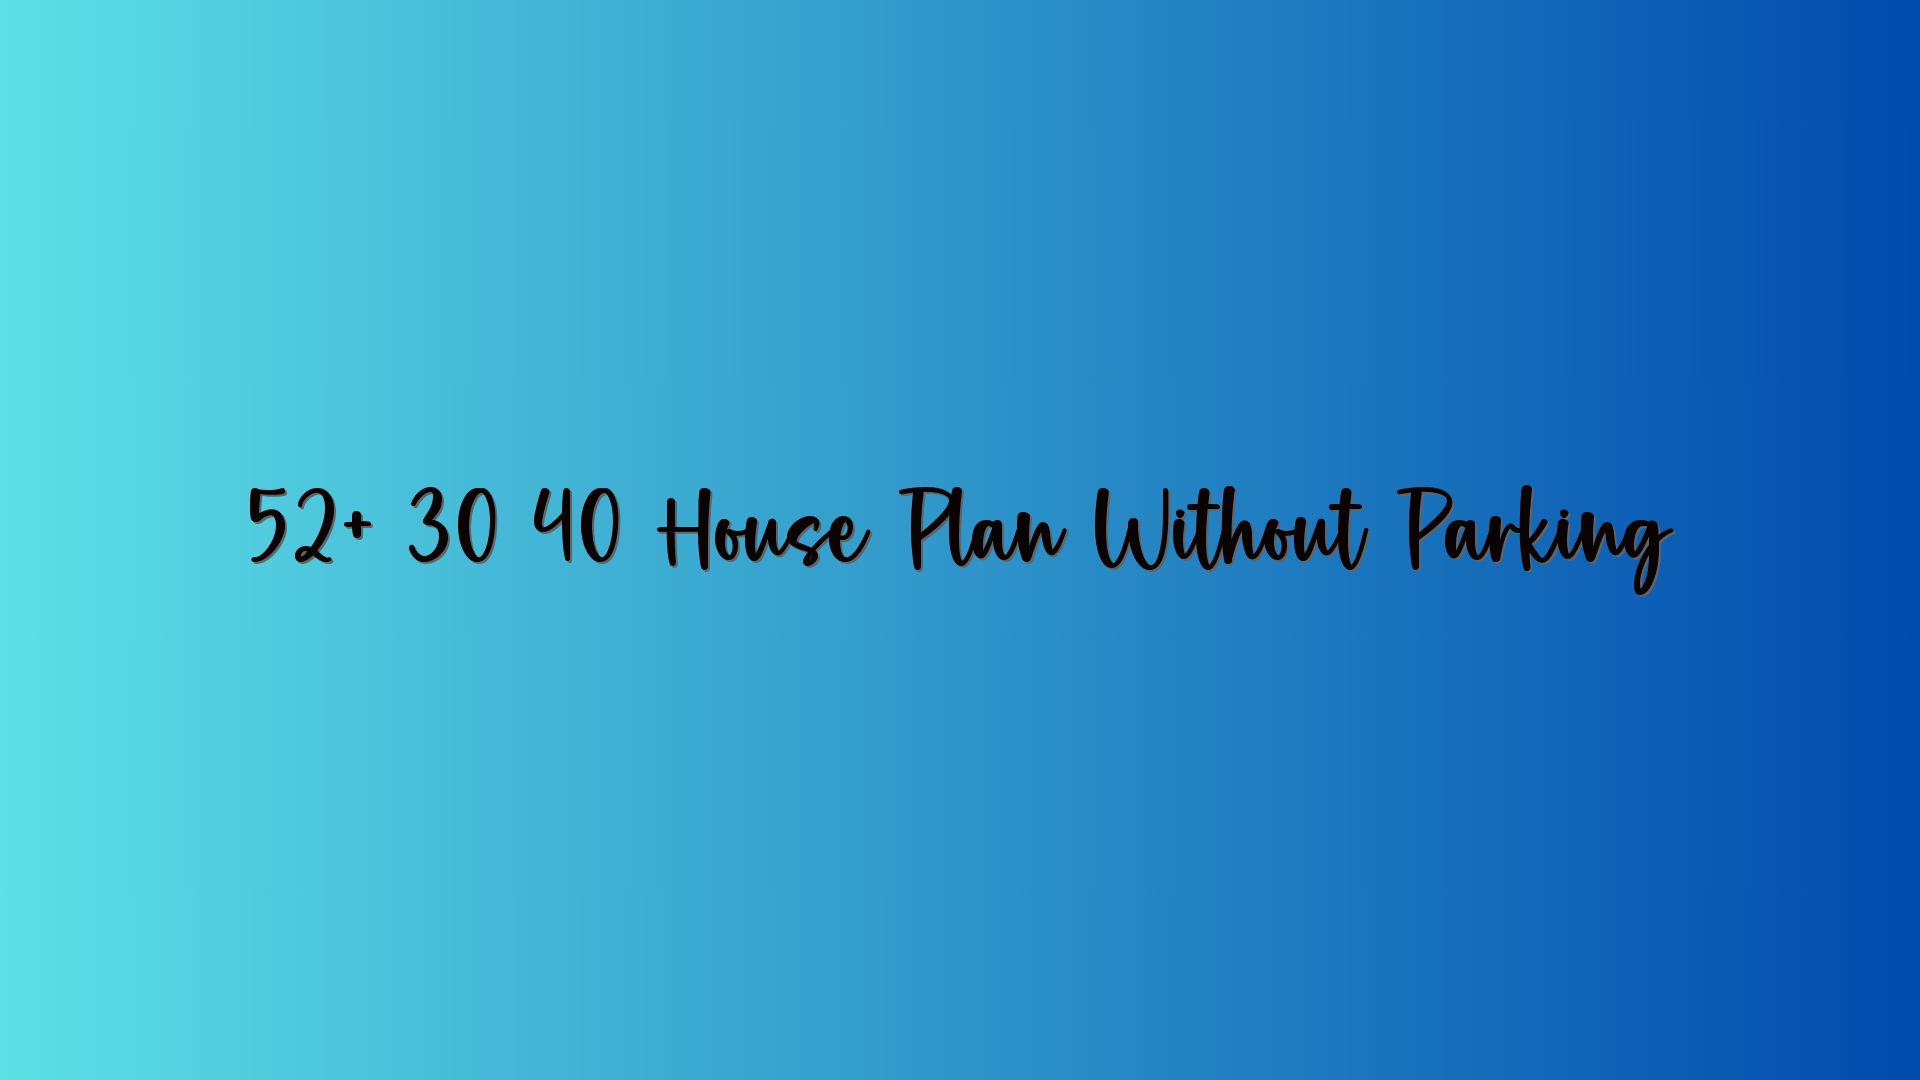 52+ 30 40 House Plan Without Parking